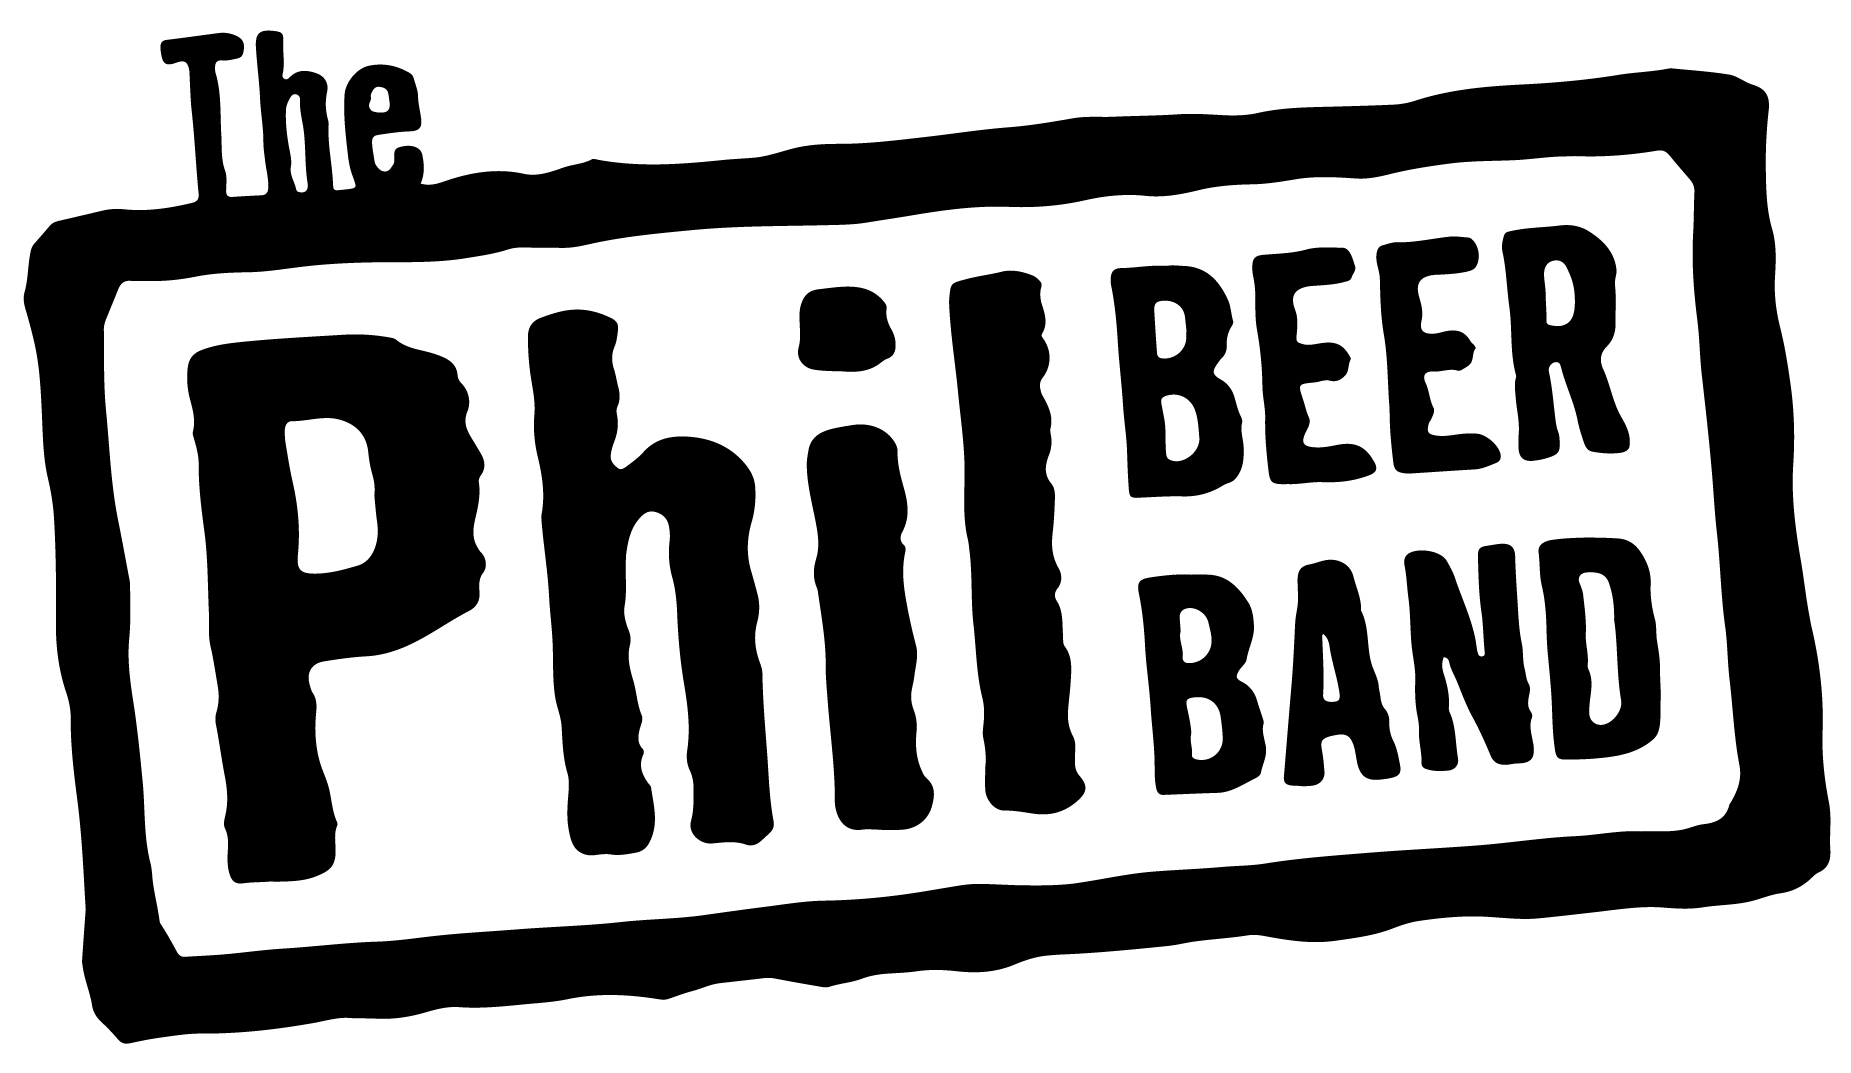 Phil Logo - Phil Beer Band Logo-01 | Dorchester Arts | Putting the arts at the ...